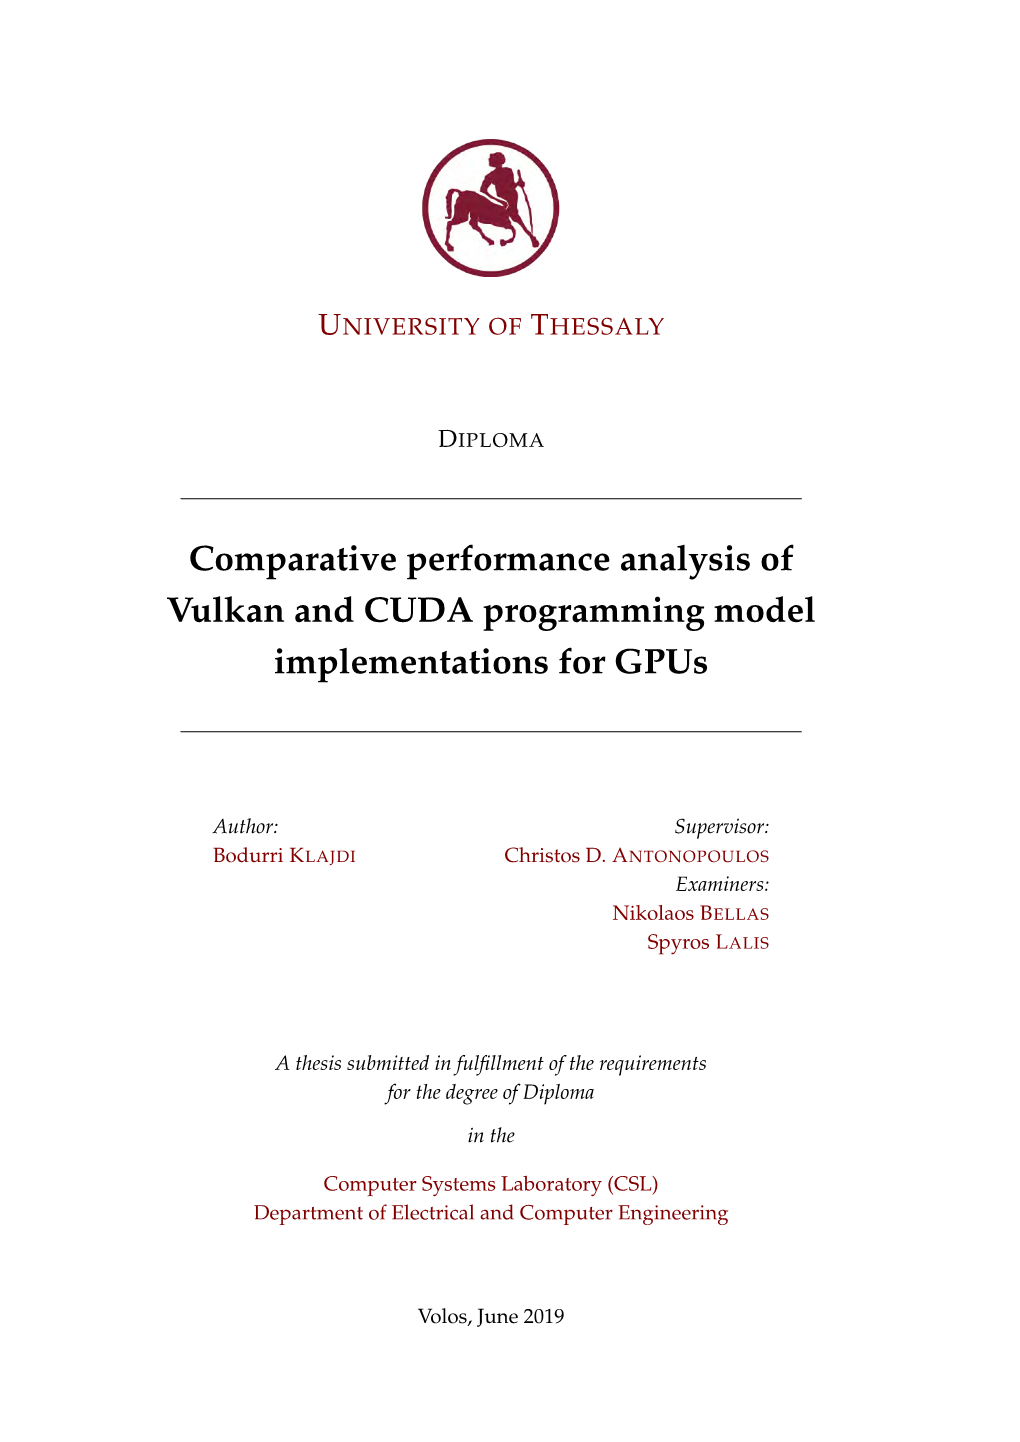 Comparative Performance Analysis of Vulkan and CUDA Programming Model Implementations for Gpus